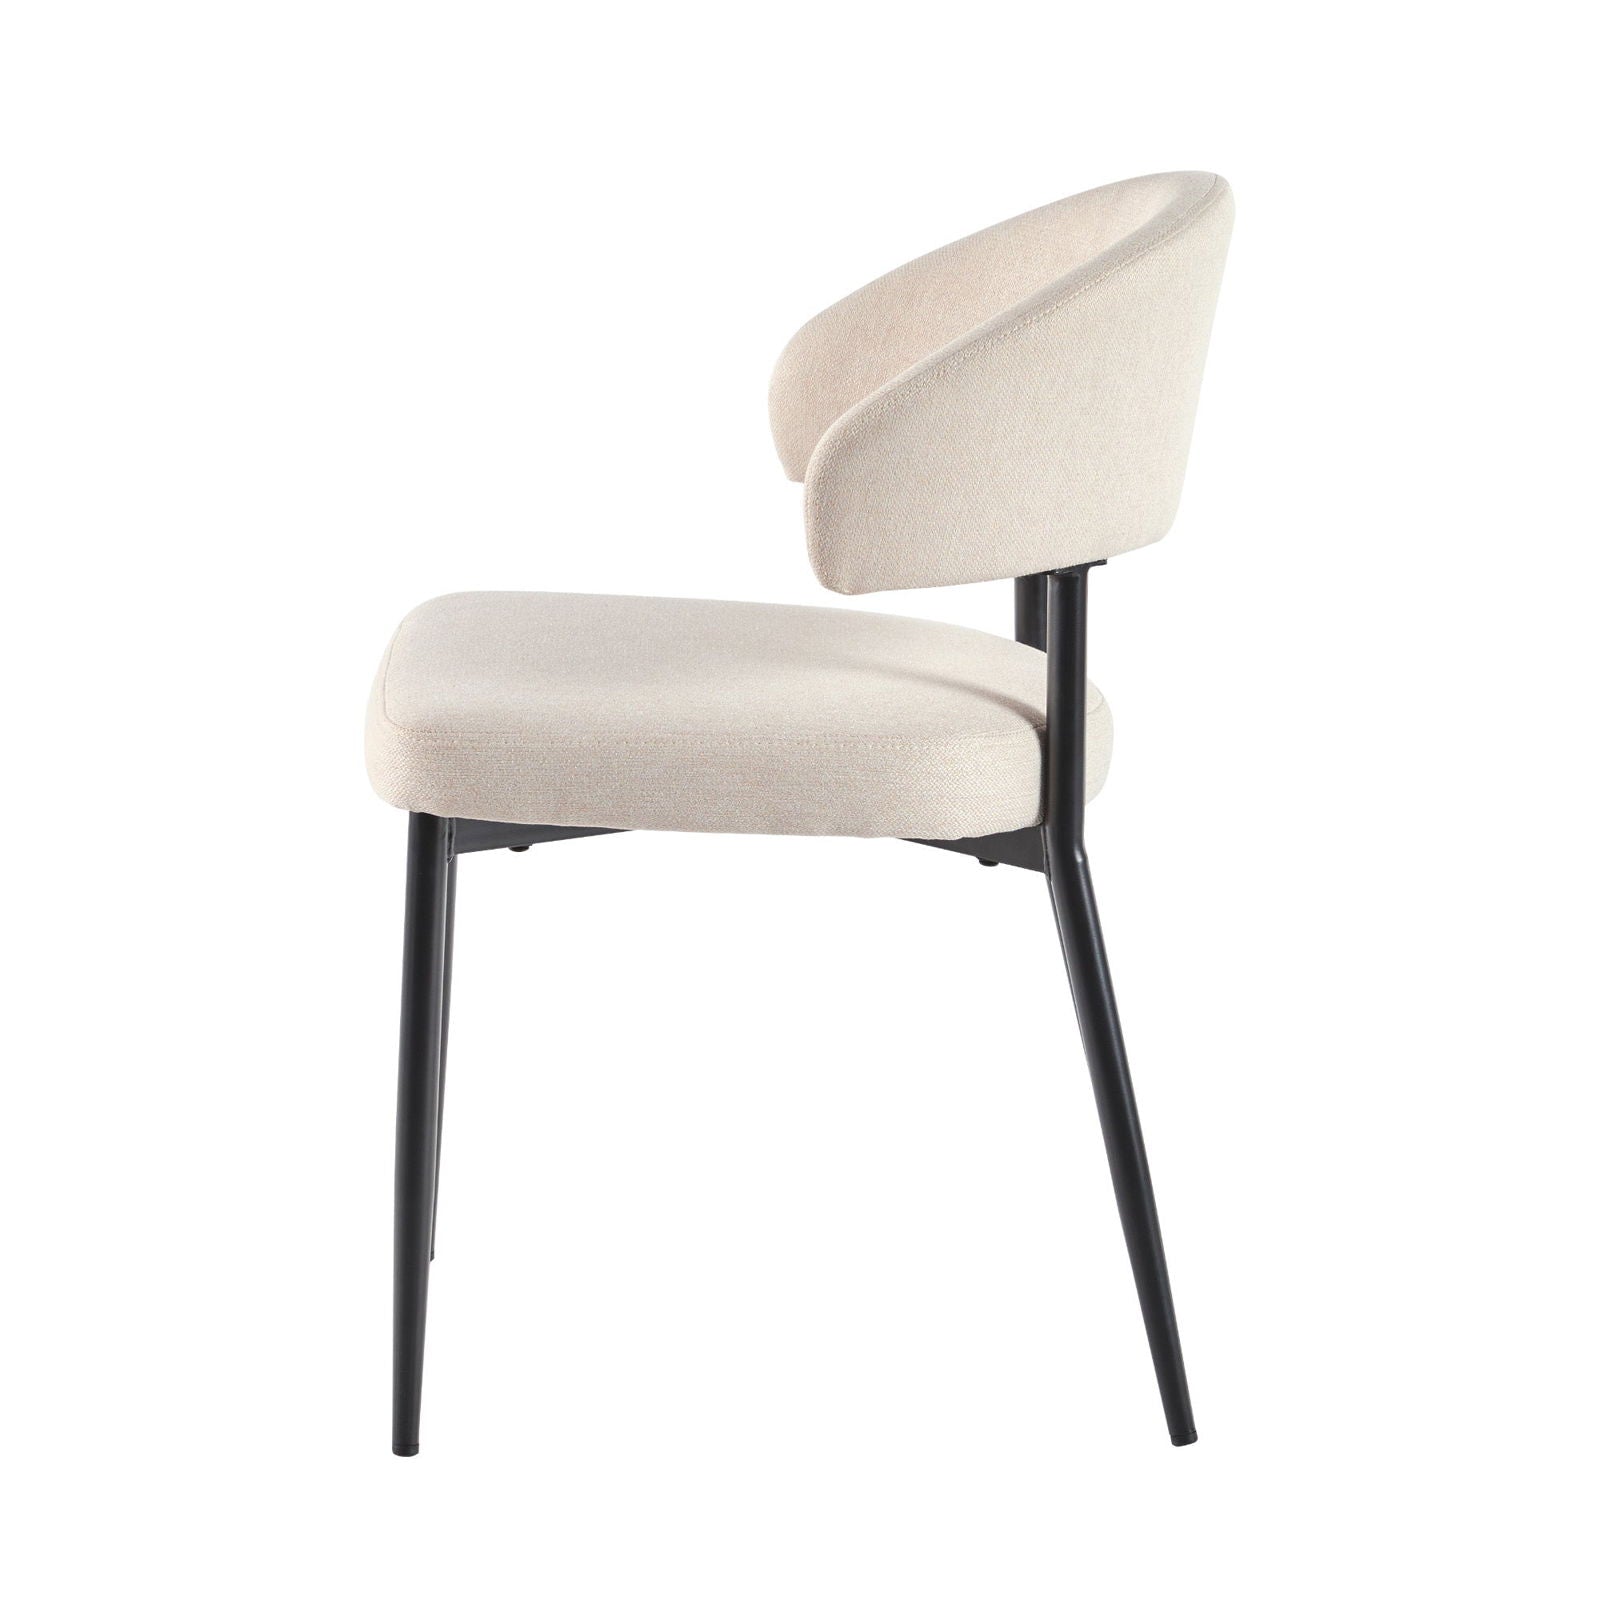 Alexis Modern Curved Back Upholstered Dining Chair, set of 2 - Mac & Mabel